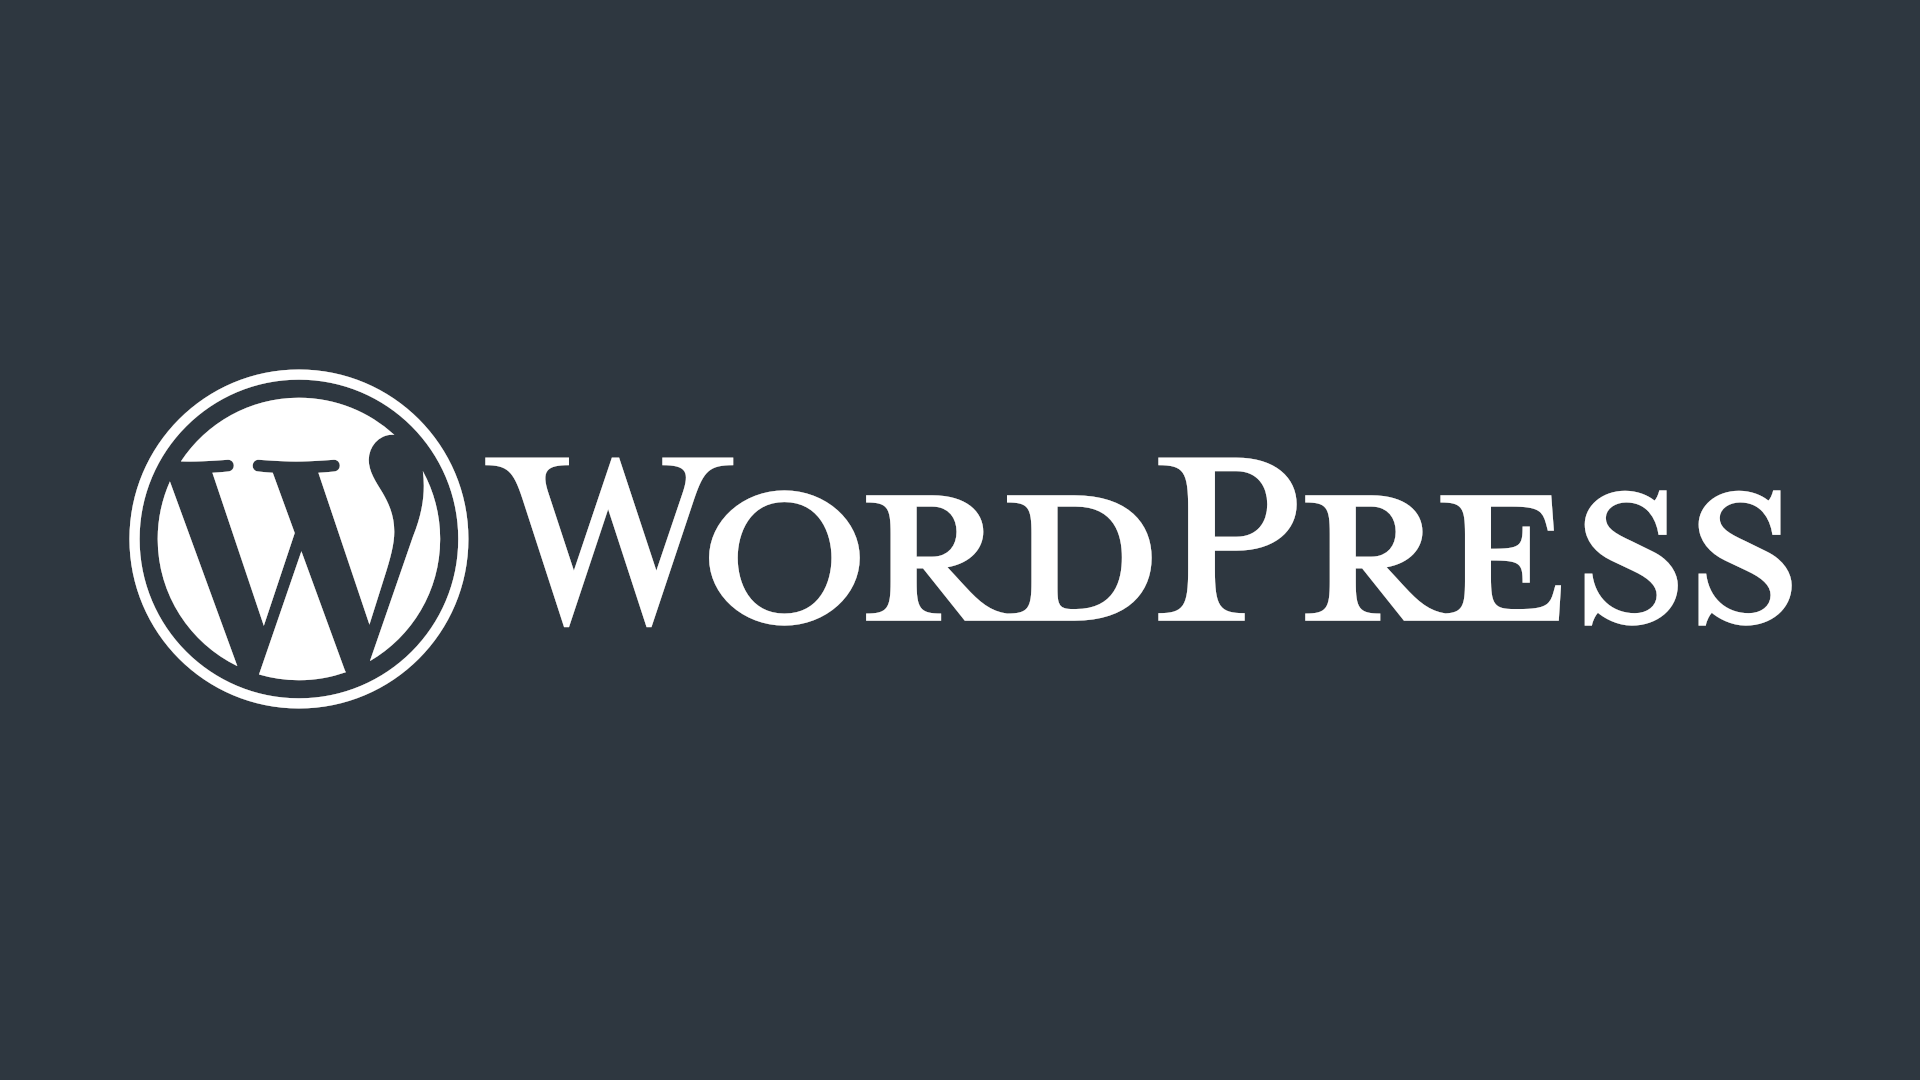 WordPress 6.0.2, Advanced Admin Handbook, Accessibility Tags for Block Themes, and Improving the Template Creation Experience